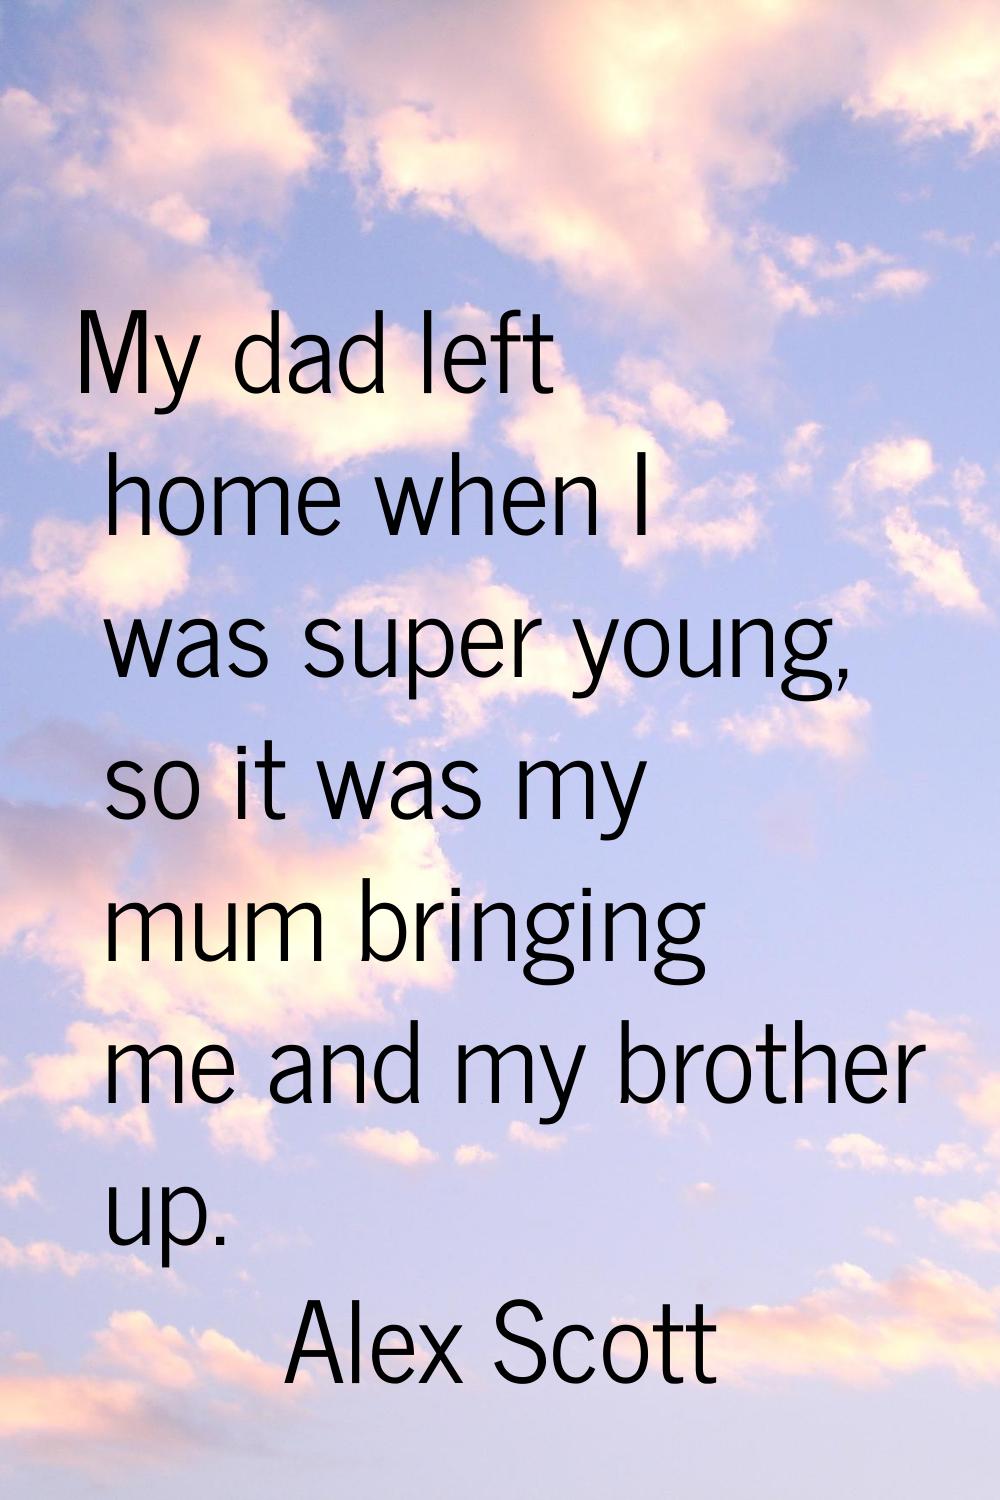 My dad left home when I was super young, so it was my mum bringing me and my brother up.